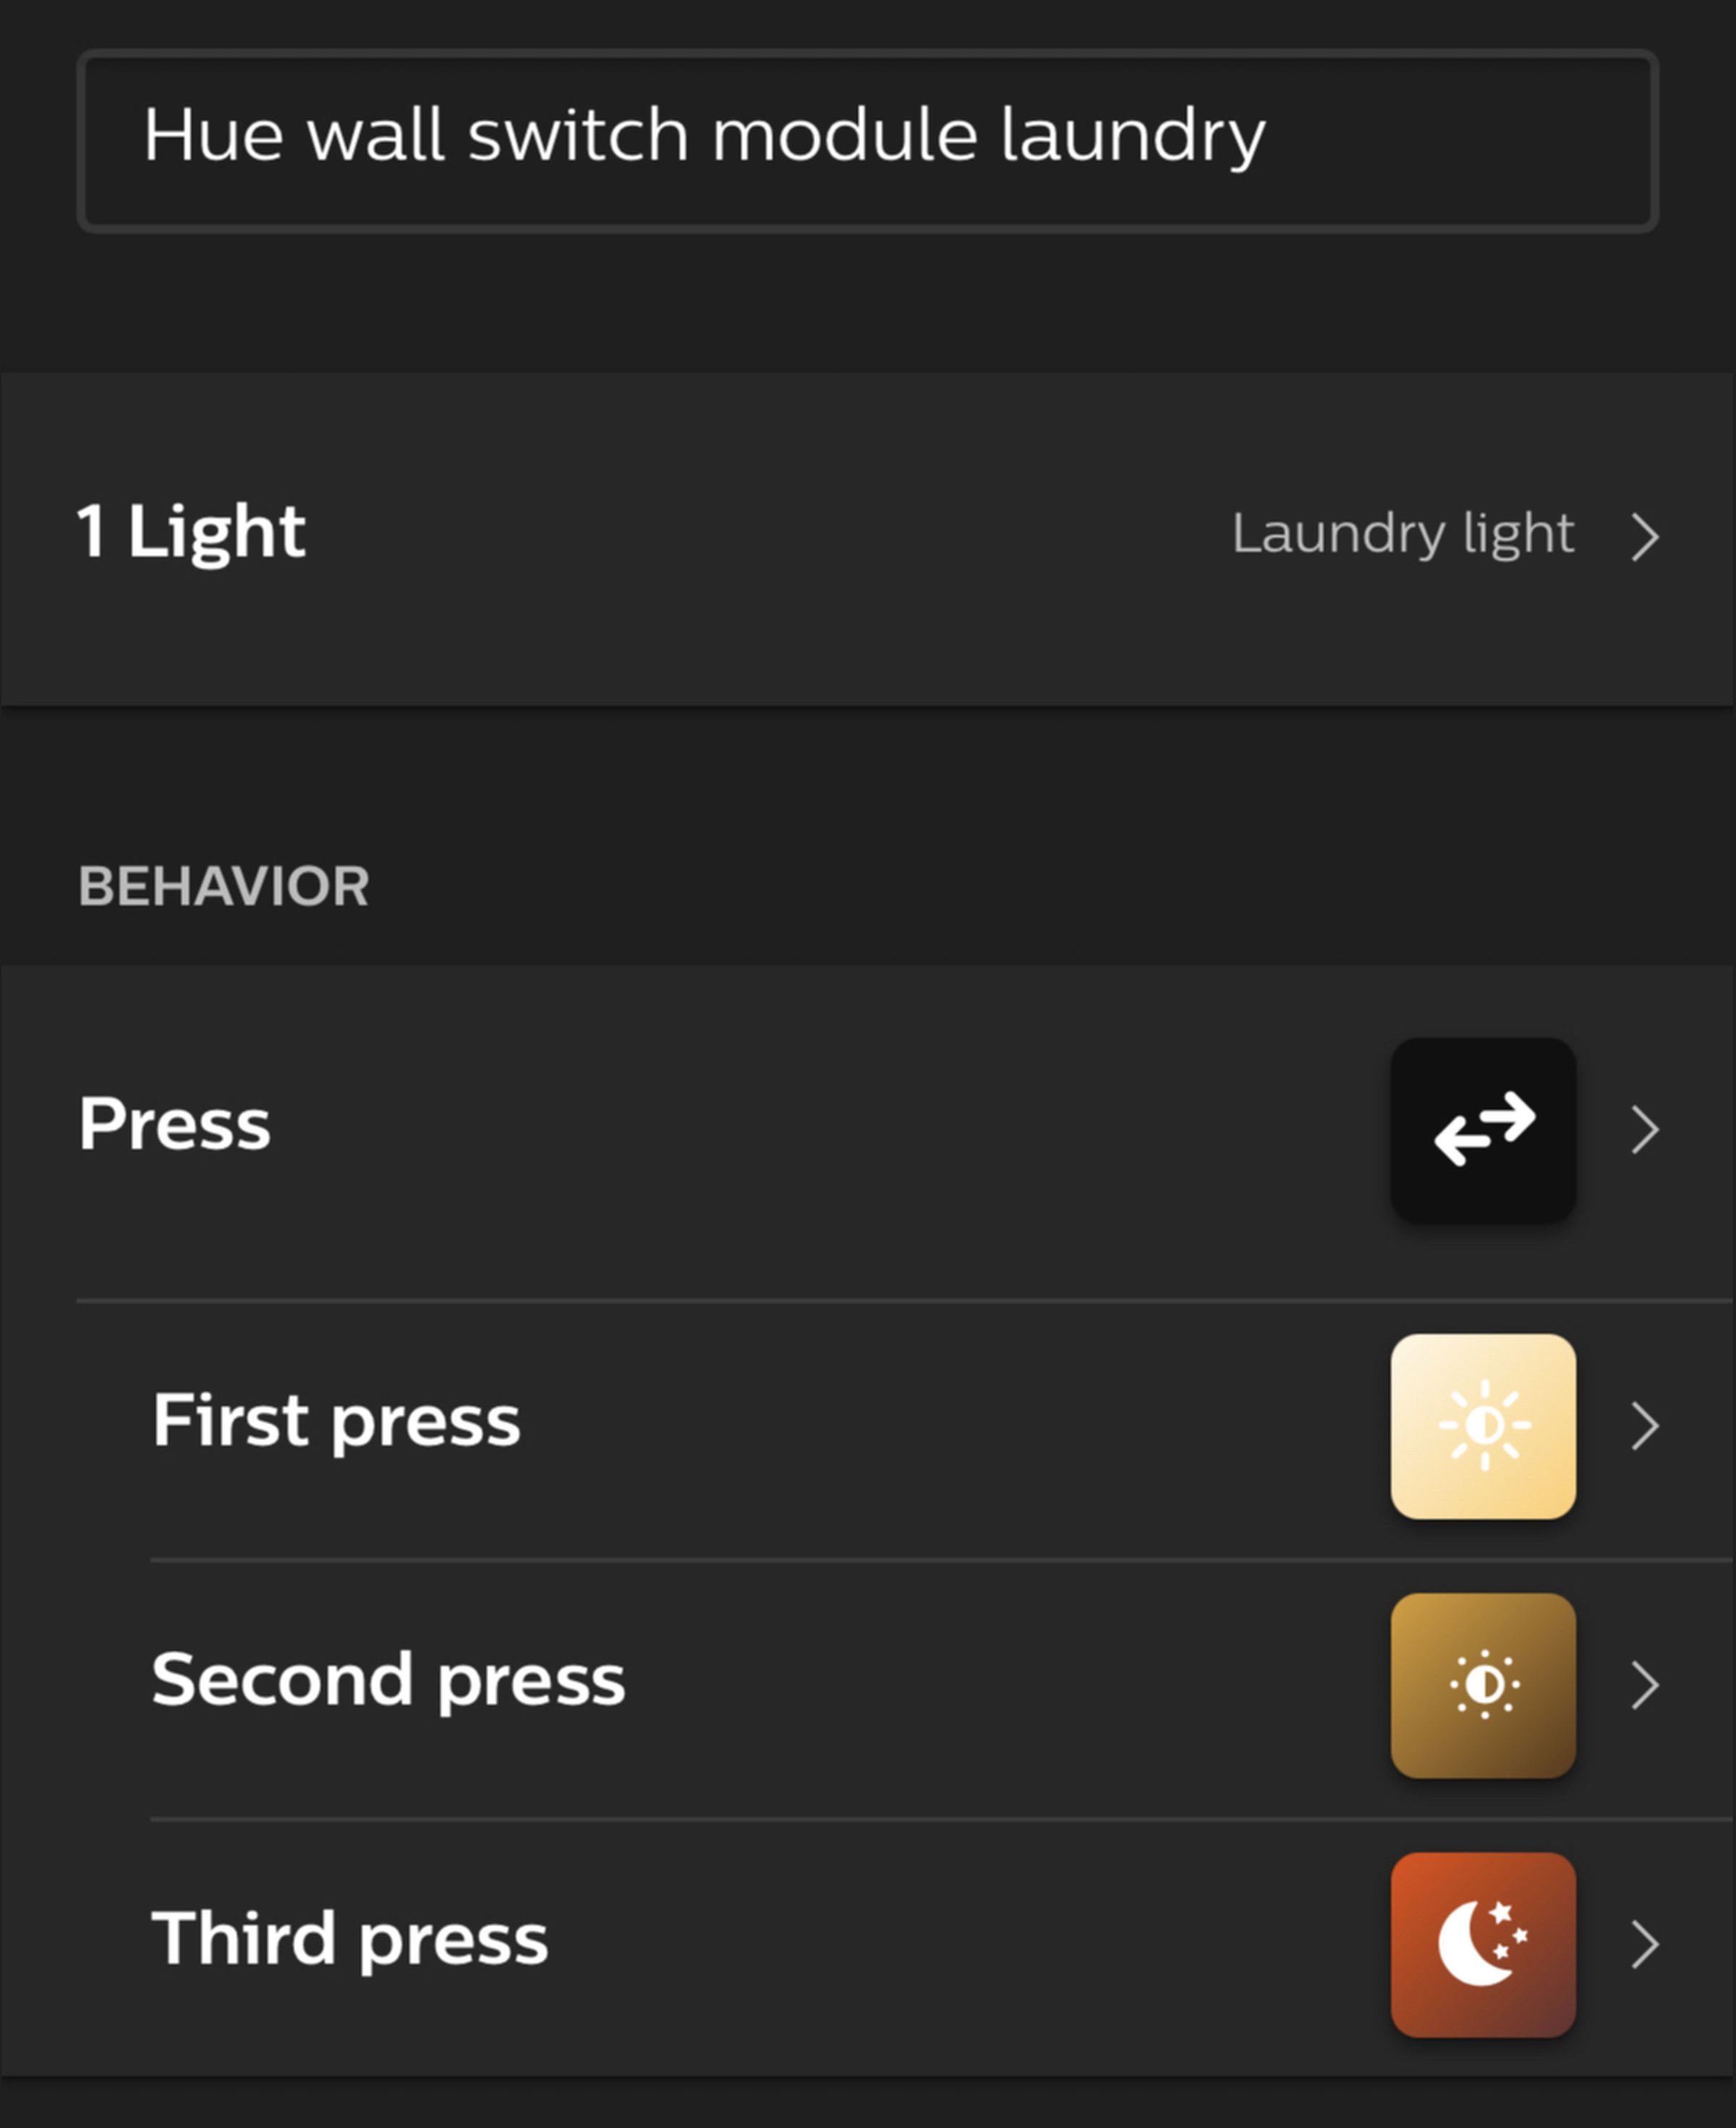 The Hue app allows button presses to be assigned scenes.